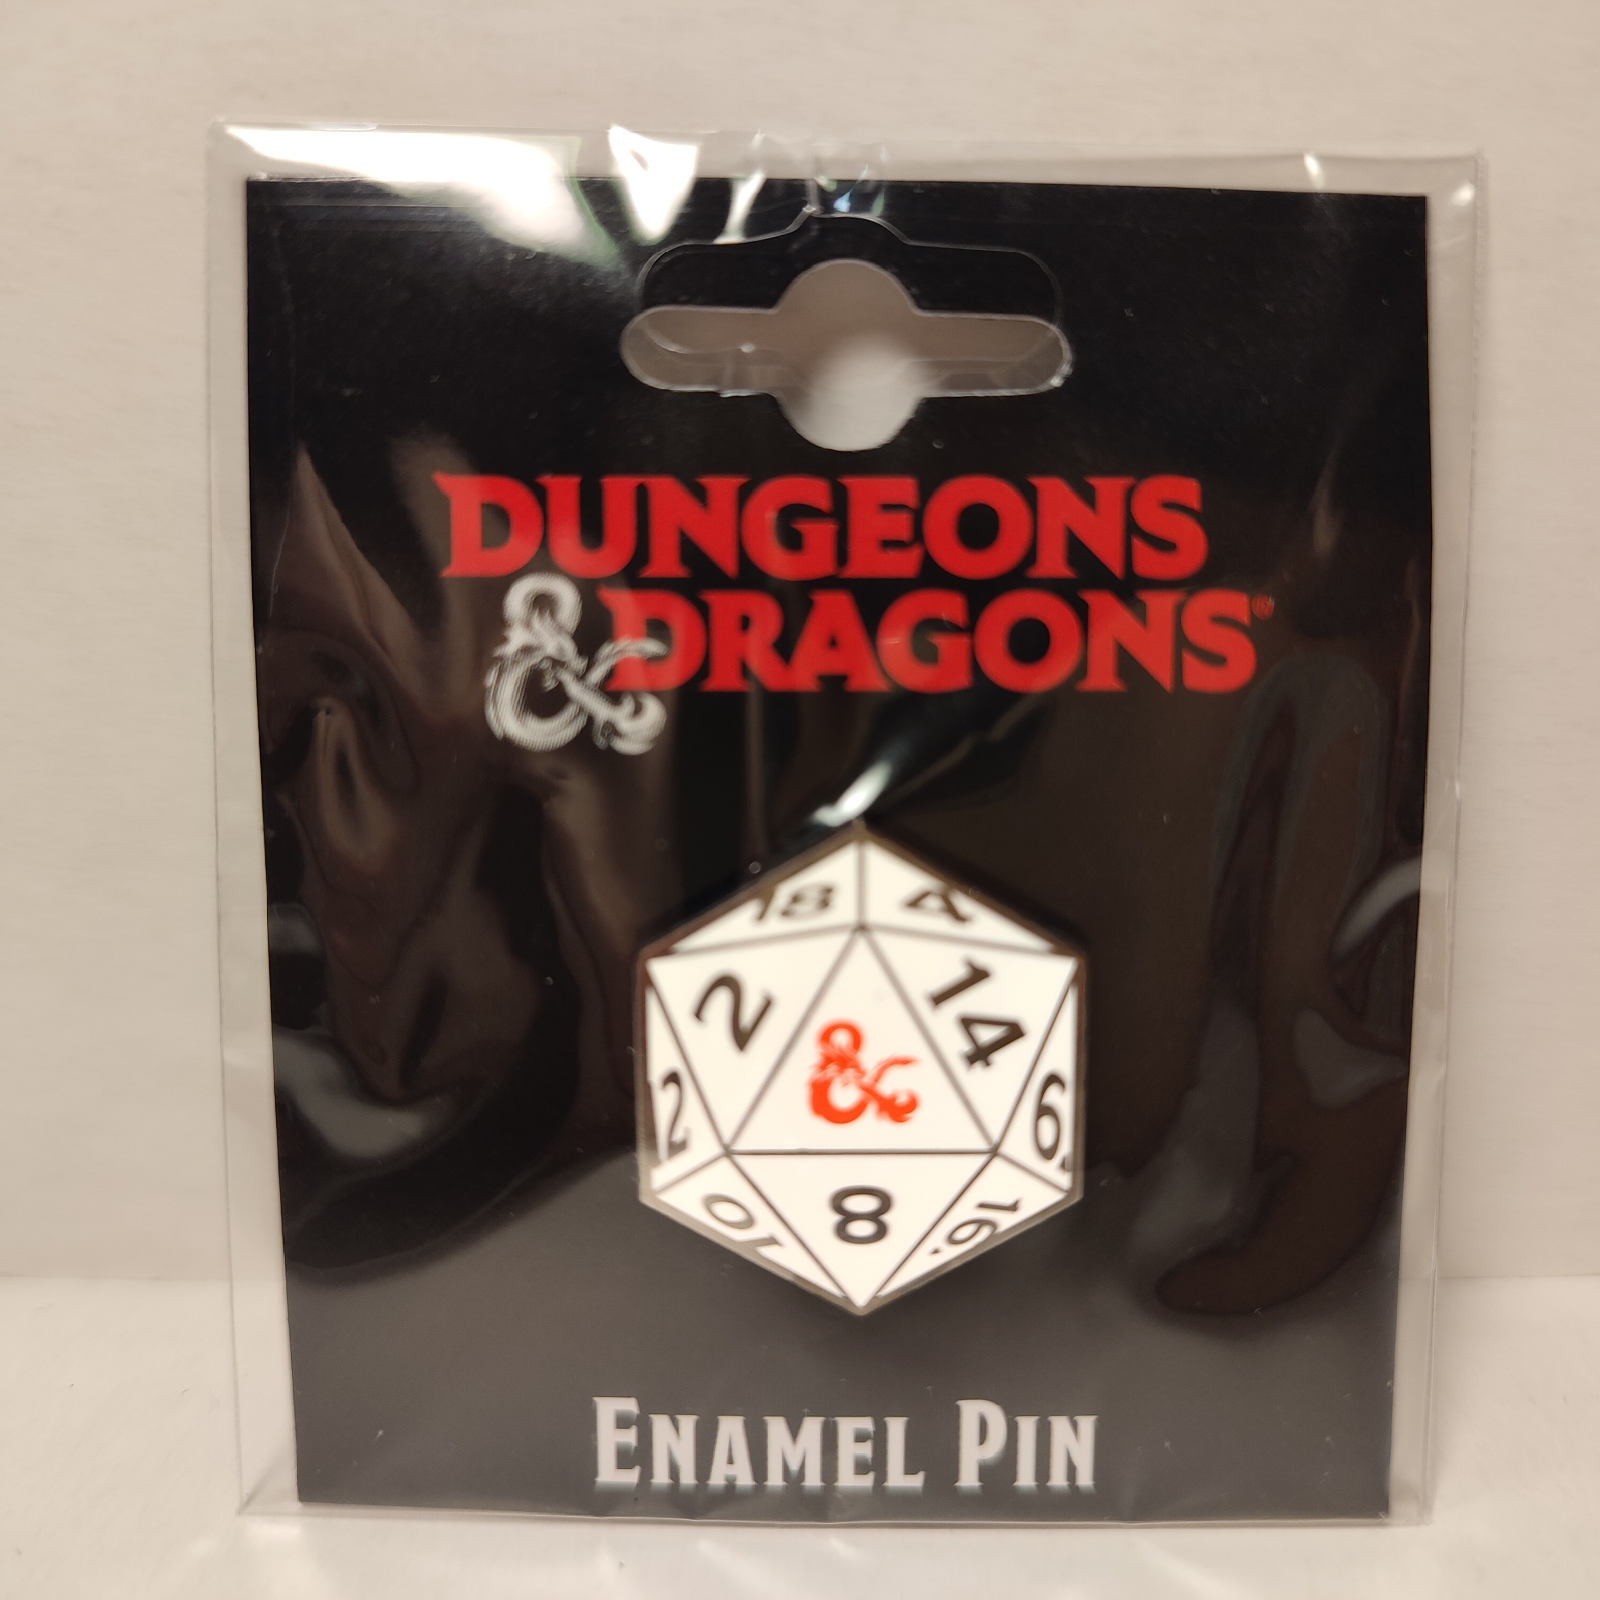 Primary image for Dungeons and Dragons 20 Sided Die Enamel Pin Official DnD Collectible